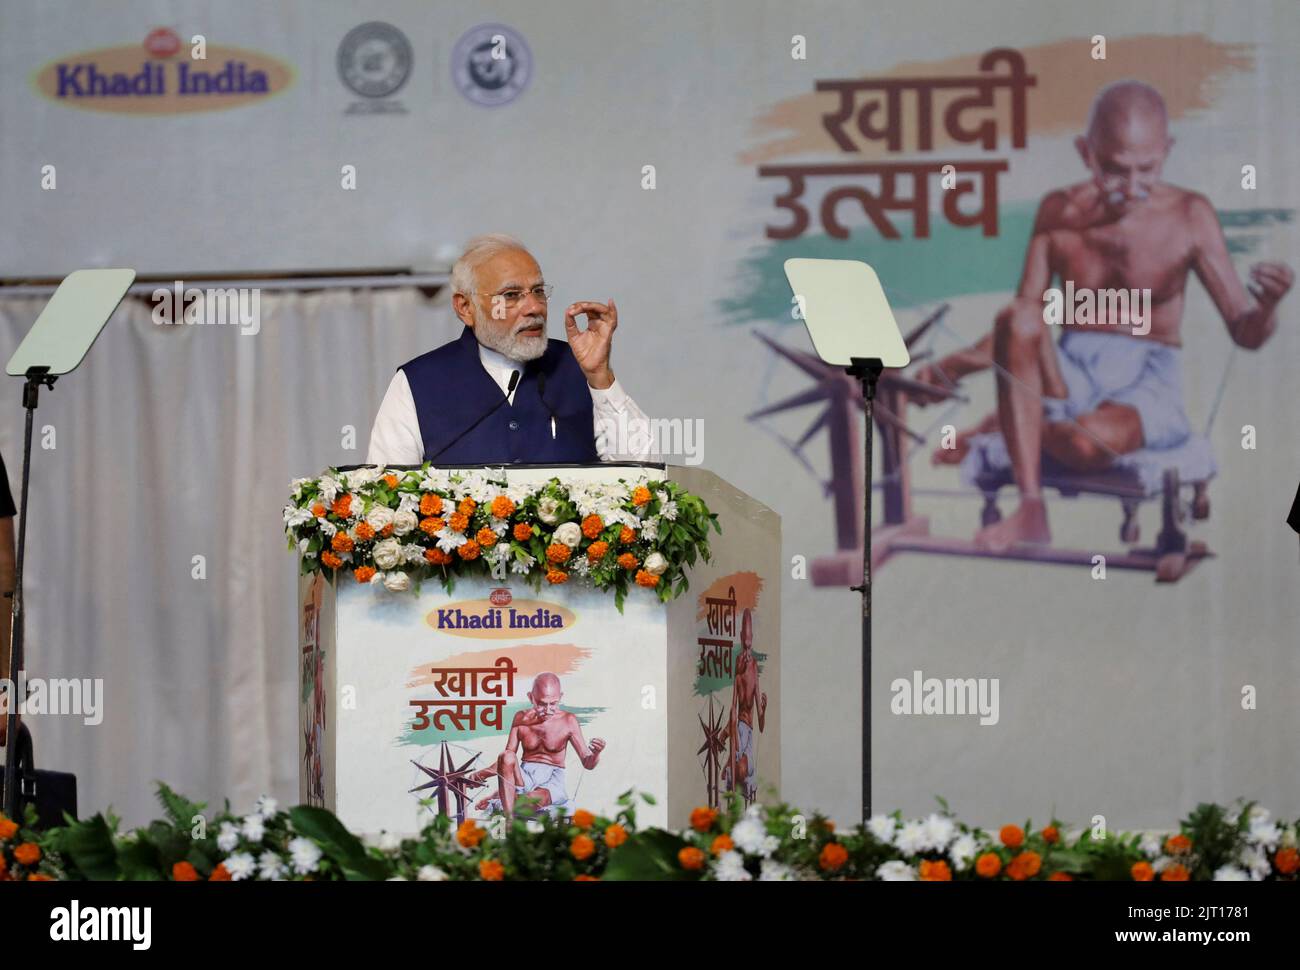 India's Prime Minister Narendra Modi speaks during an event where 7500 artisans spin cotton live at same place to promote hand woven cotton cloth as part of the celebrations commemorating 75 years of India's Independence, in Ahmedabad, India, August 27, 2022. REUTERS/Amit Dave Stock Photo